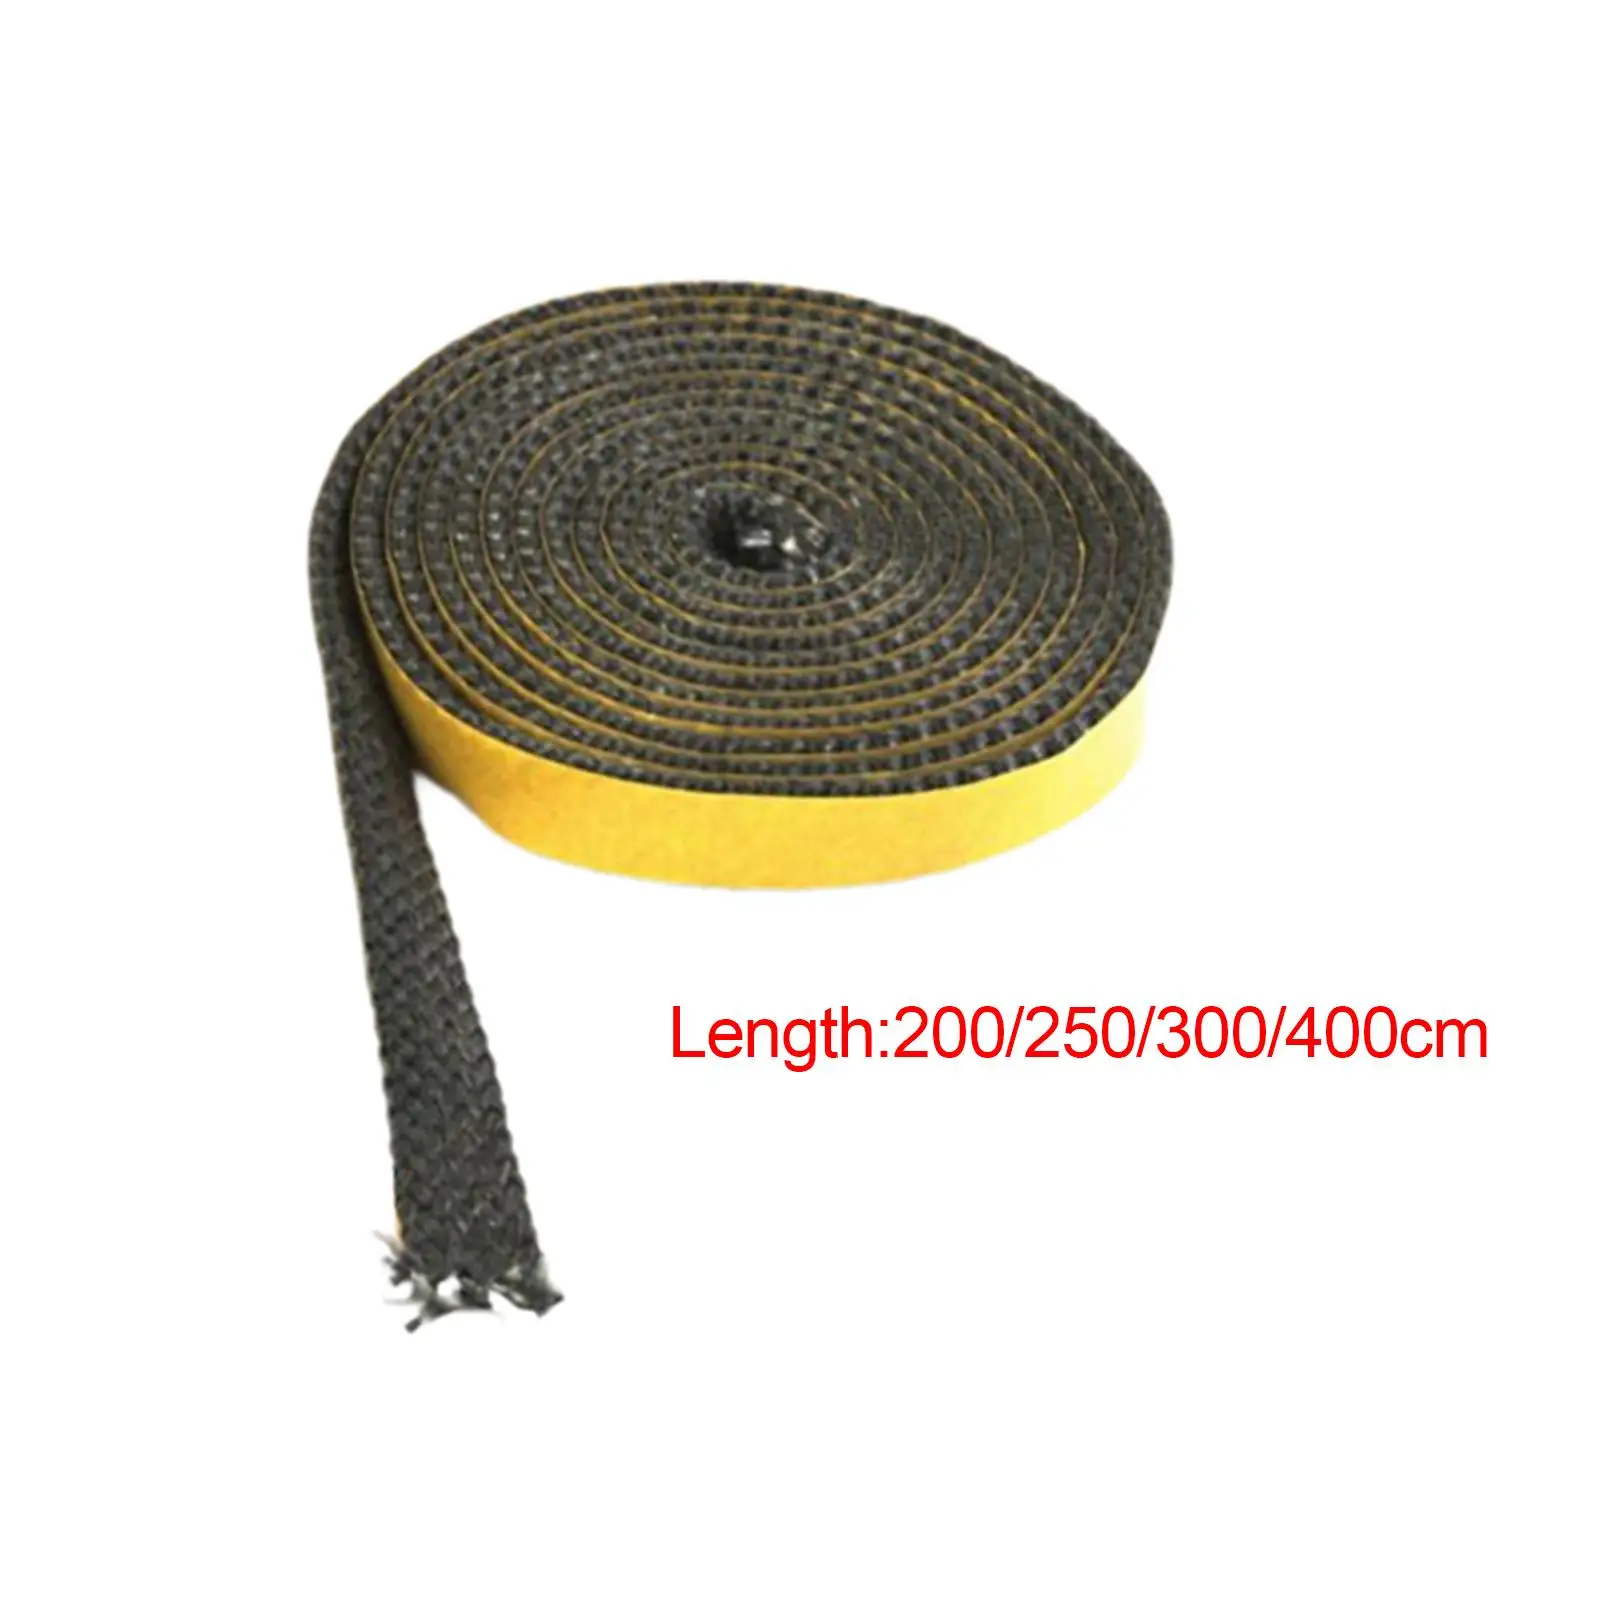 Stoves Gasket Fiberglass Flat Gasket Tape Replaces for Glass Door Fireplace